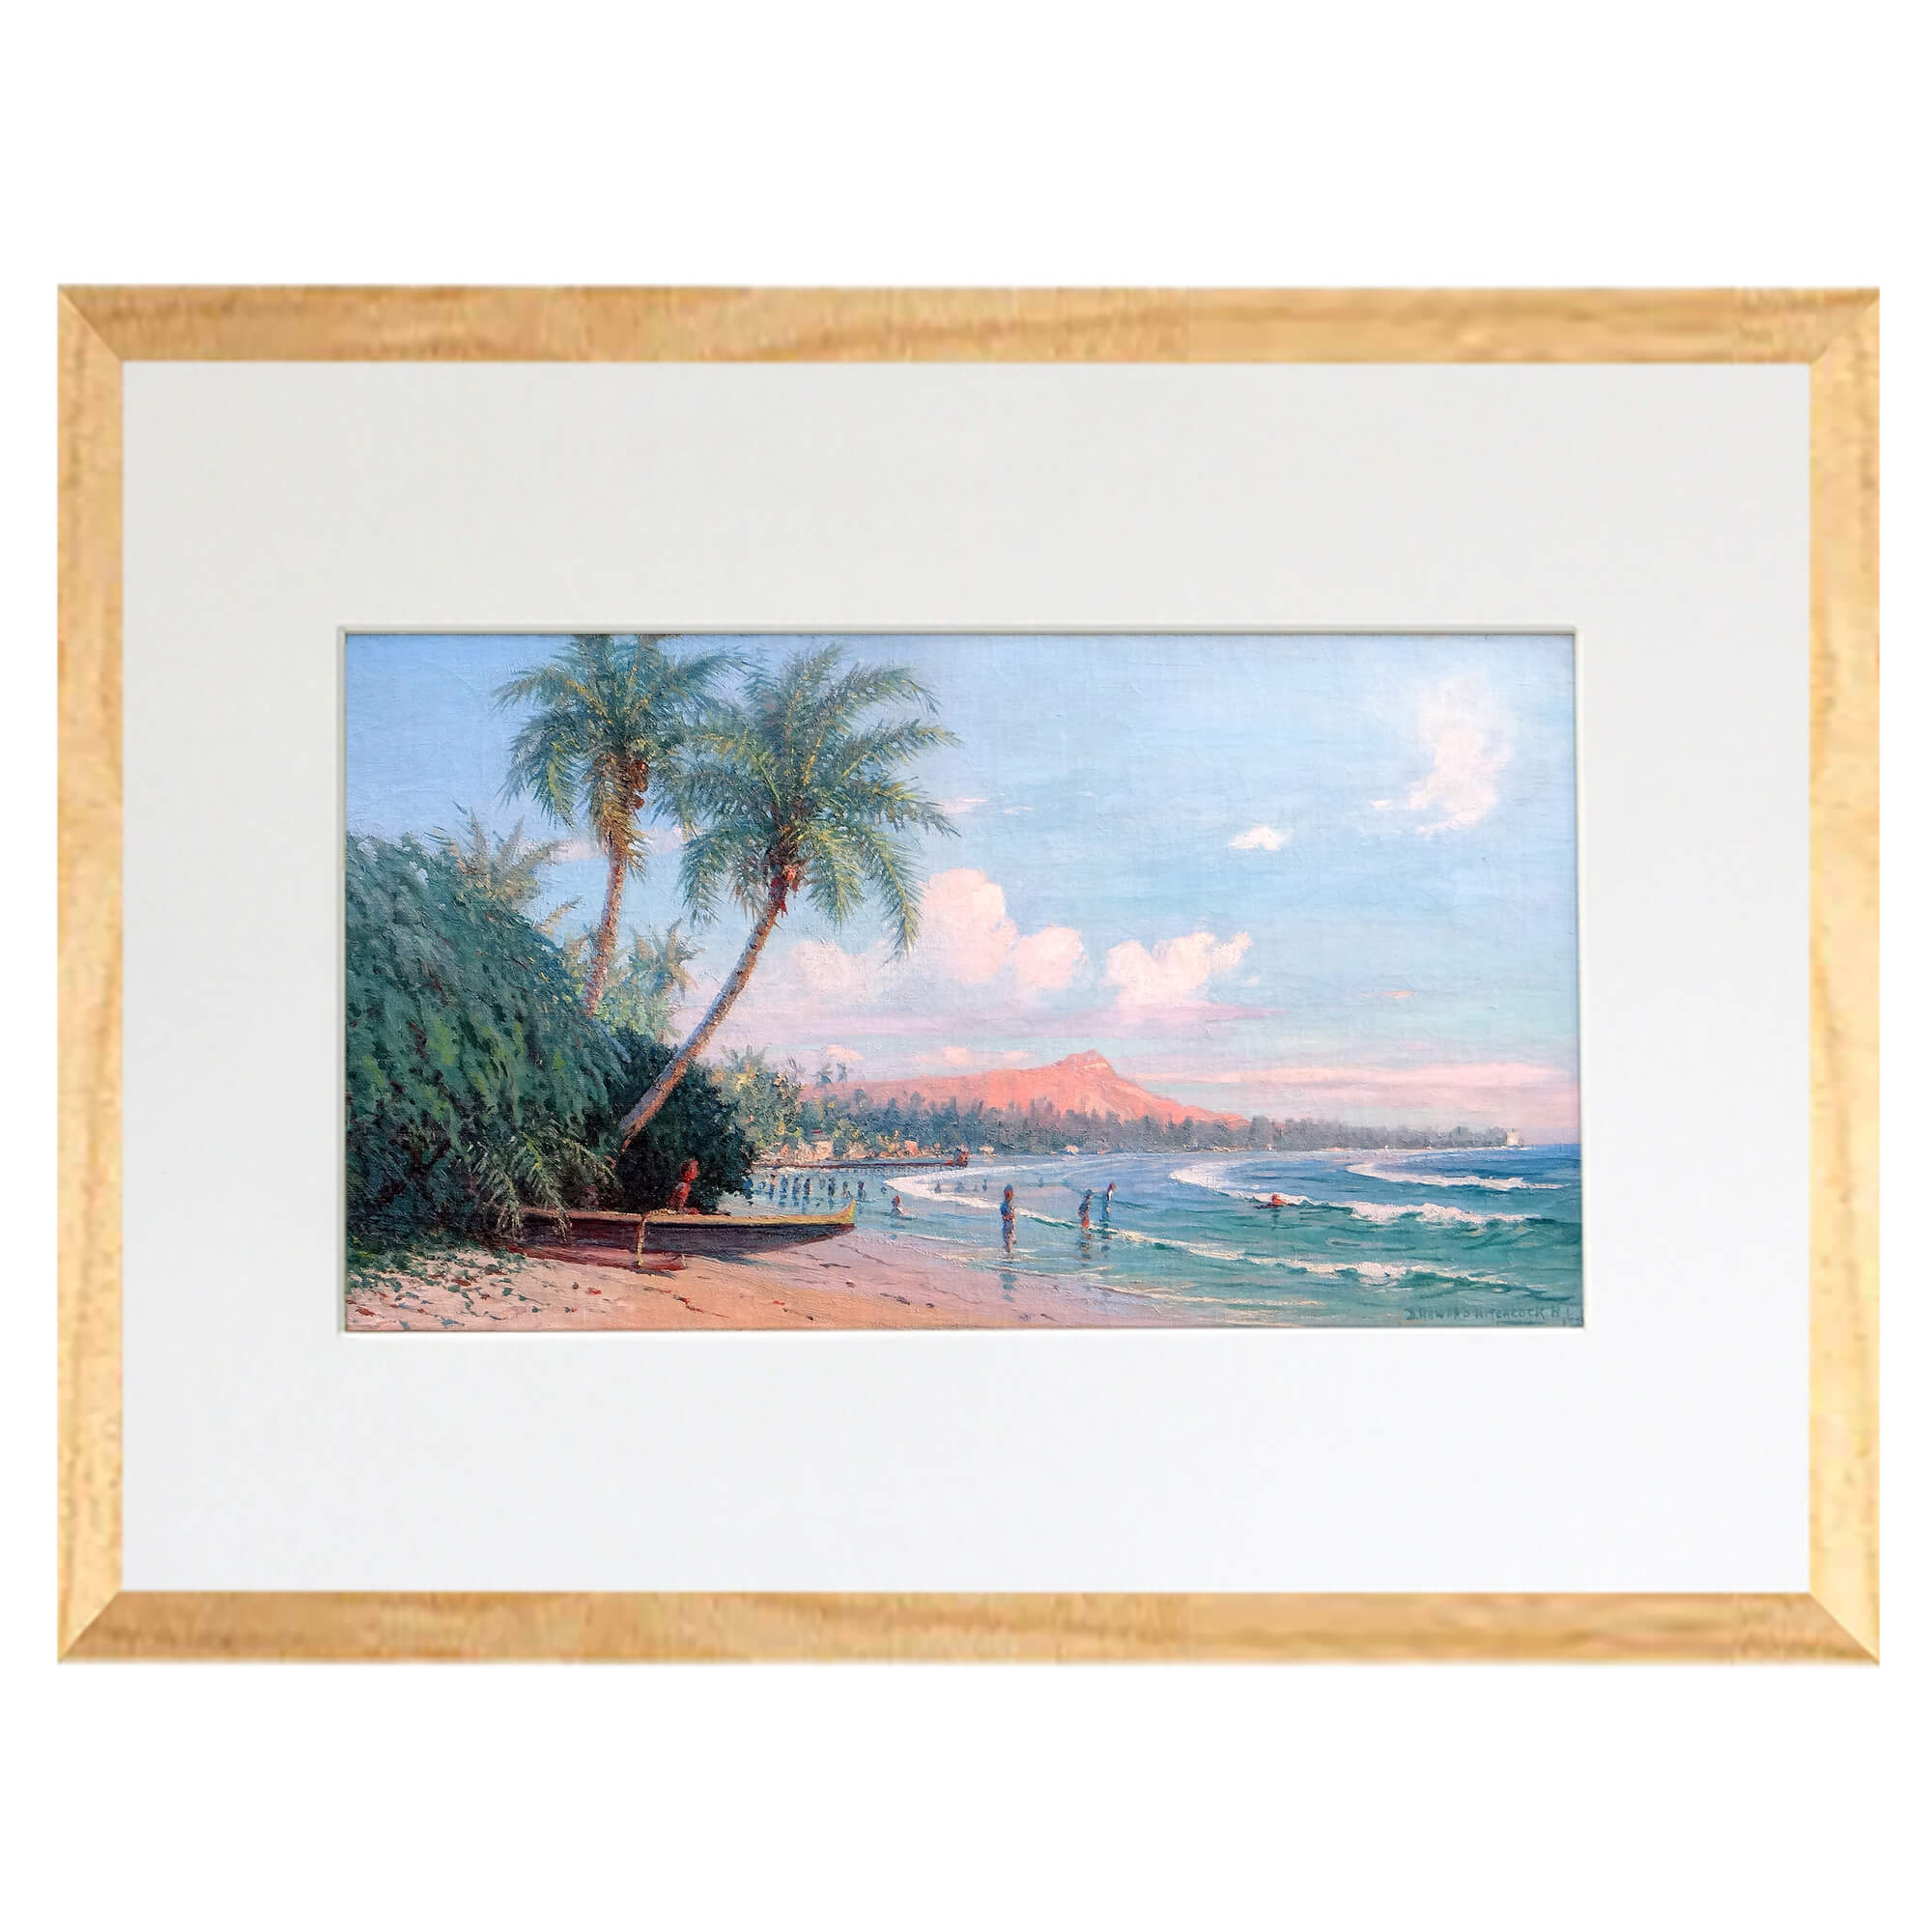 Matted art print showcasing people on the beach by hawaii artist  David Hitchcock